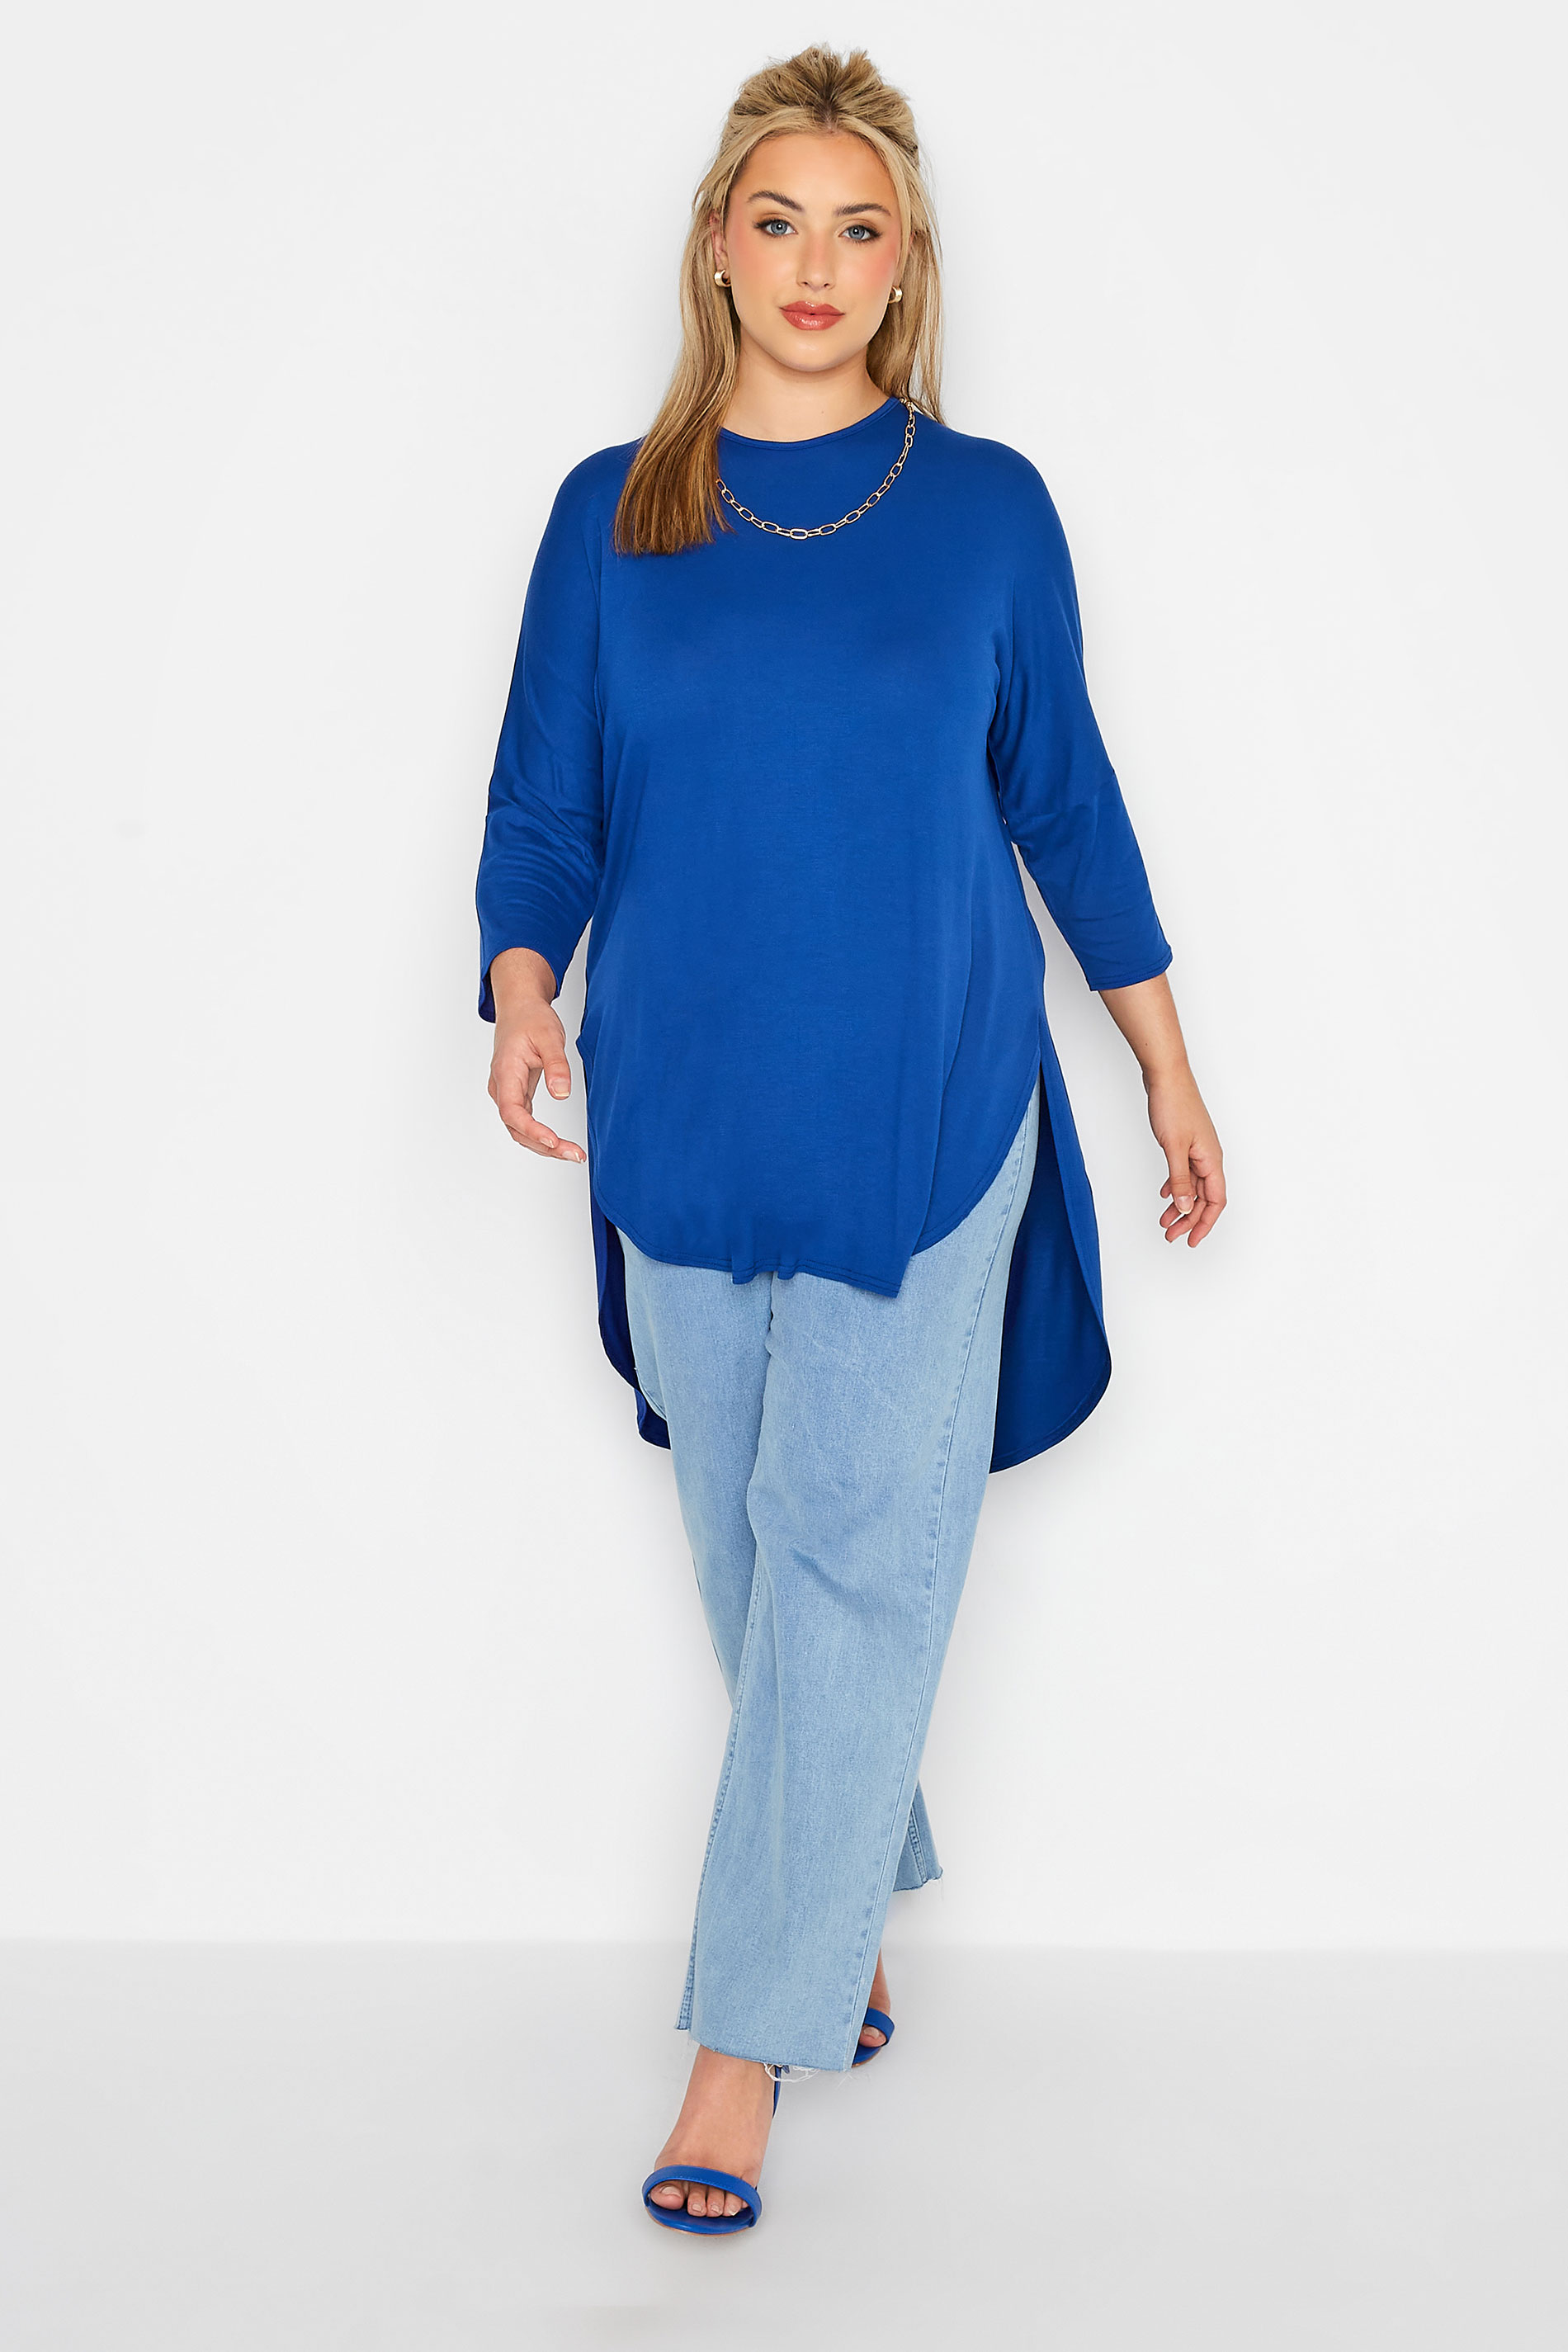 Grande taille  Tops Grande taille  Tops Ourlet Plongeant | LIMITED COLLECTION - T-Shirt Bleu Roi Manches Longues Ourlet Plongeant - OI13541